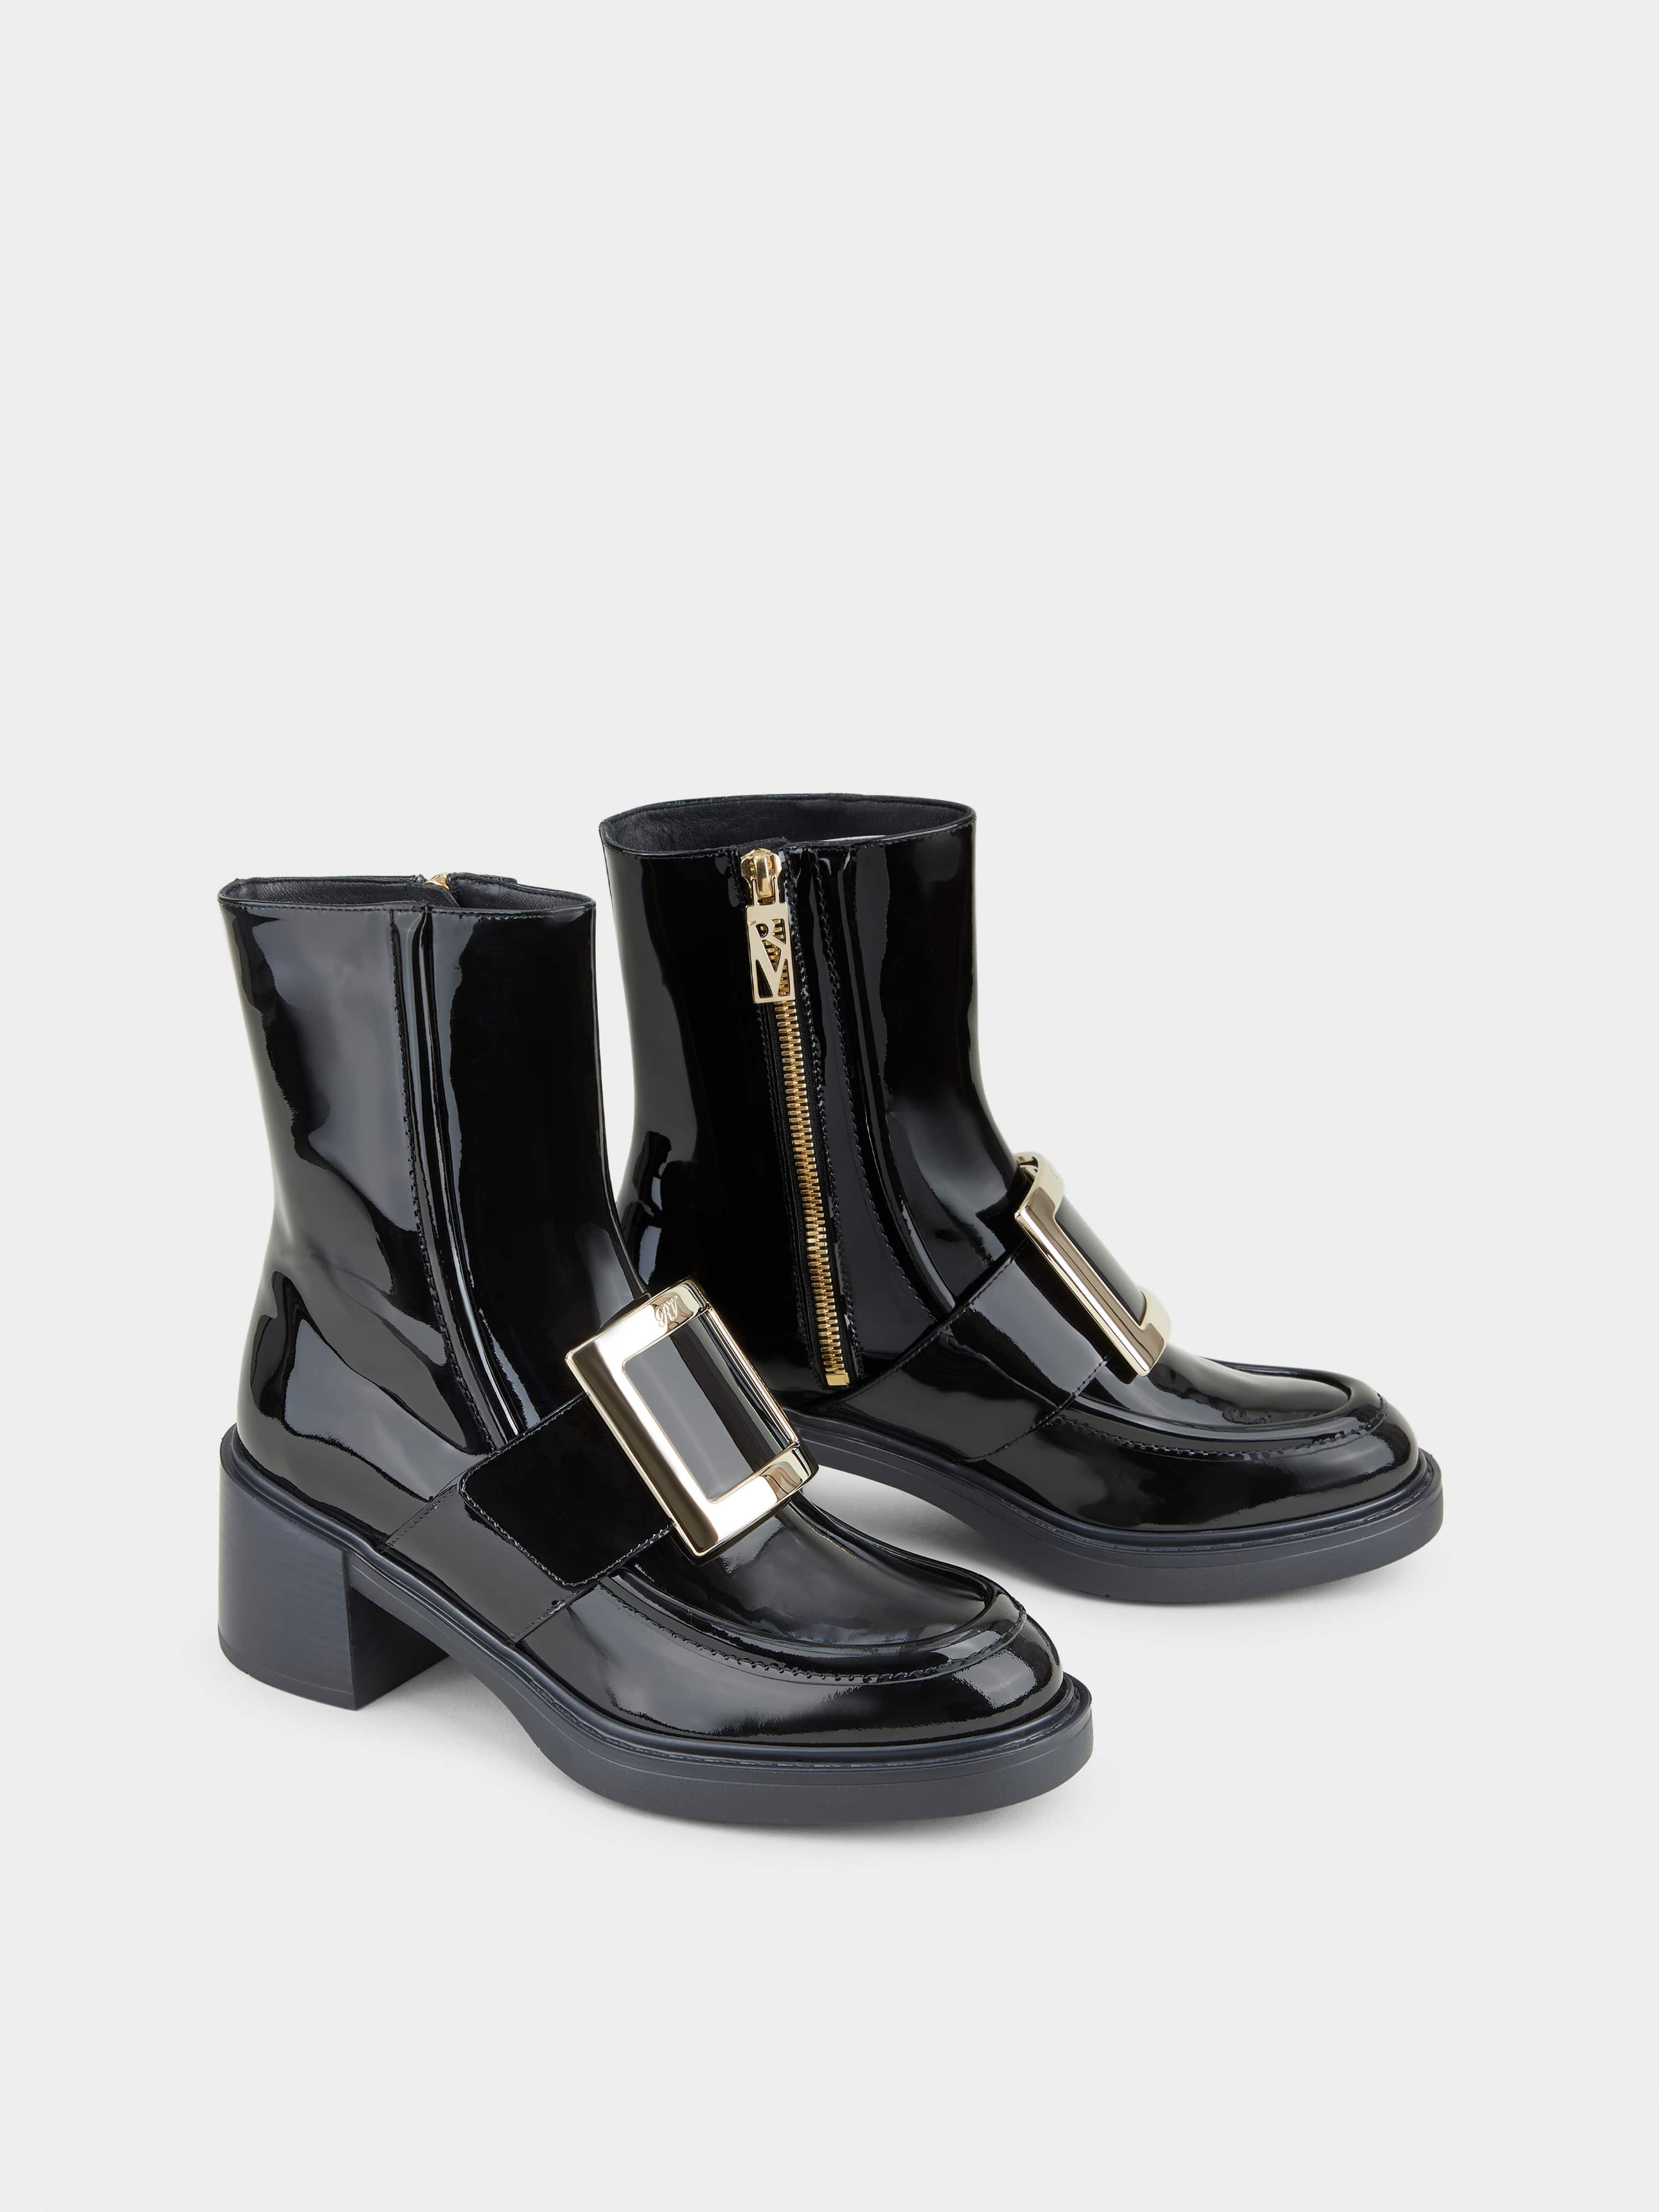 Viv' Rangers Metal Buckle Ankle Boots in Patent Leather - 2